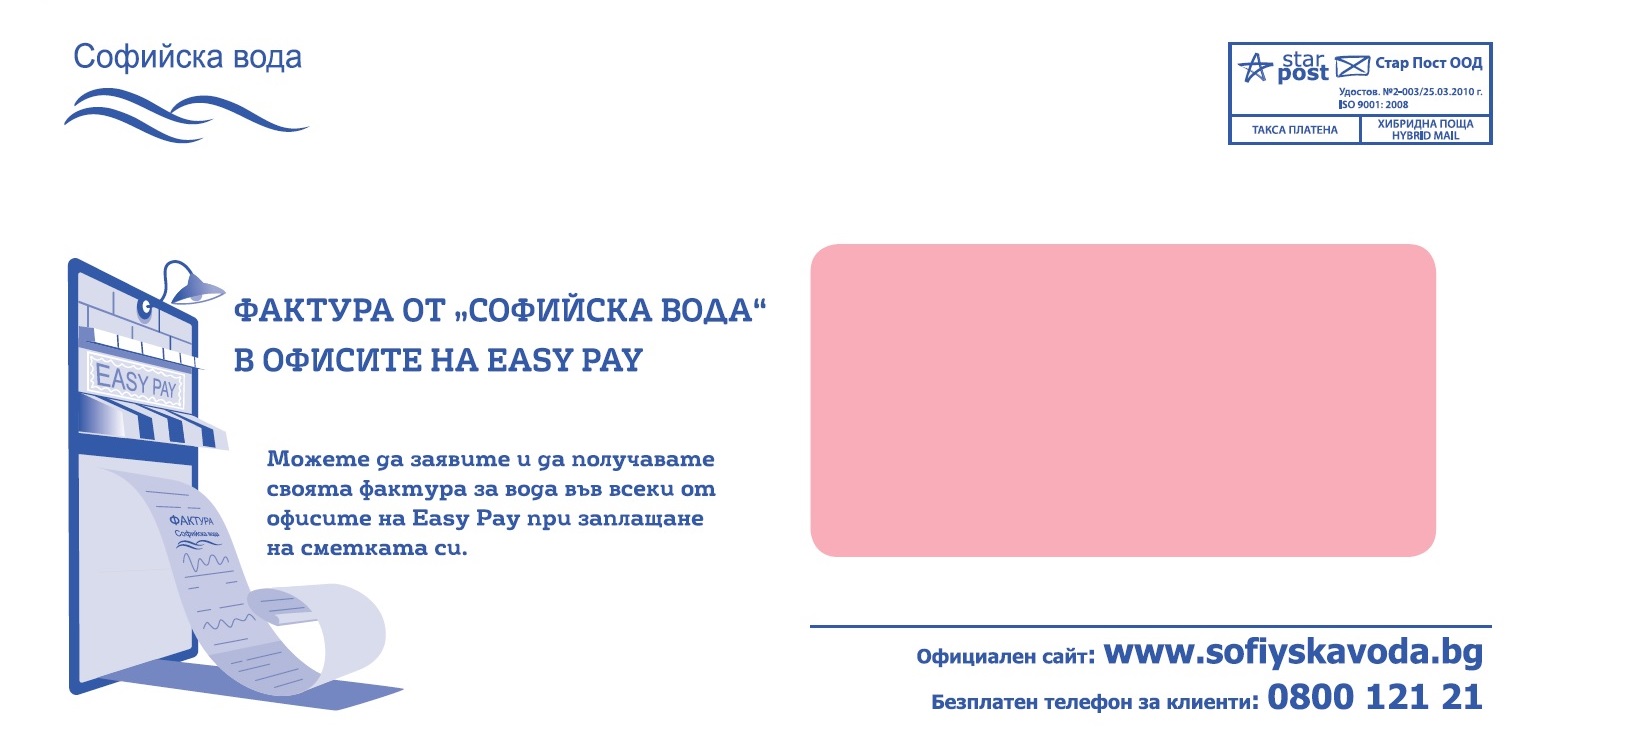 Sofiyska Voda AD reminds about the possibility to obtain invoices at the EasyPay cash desks